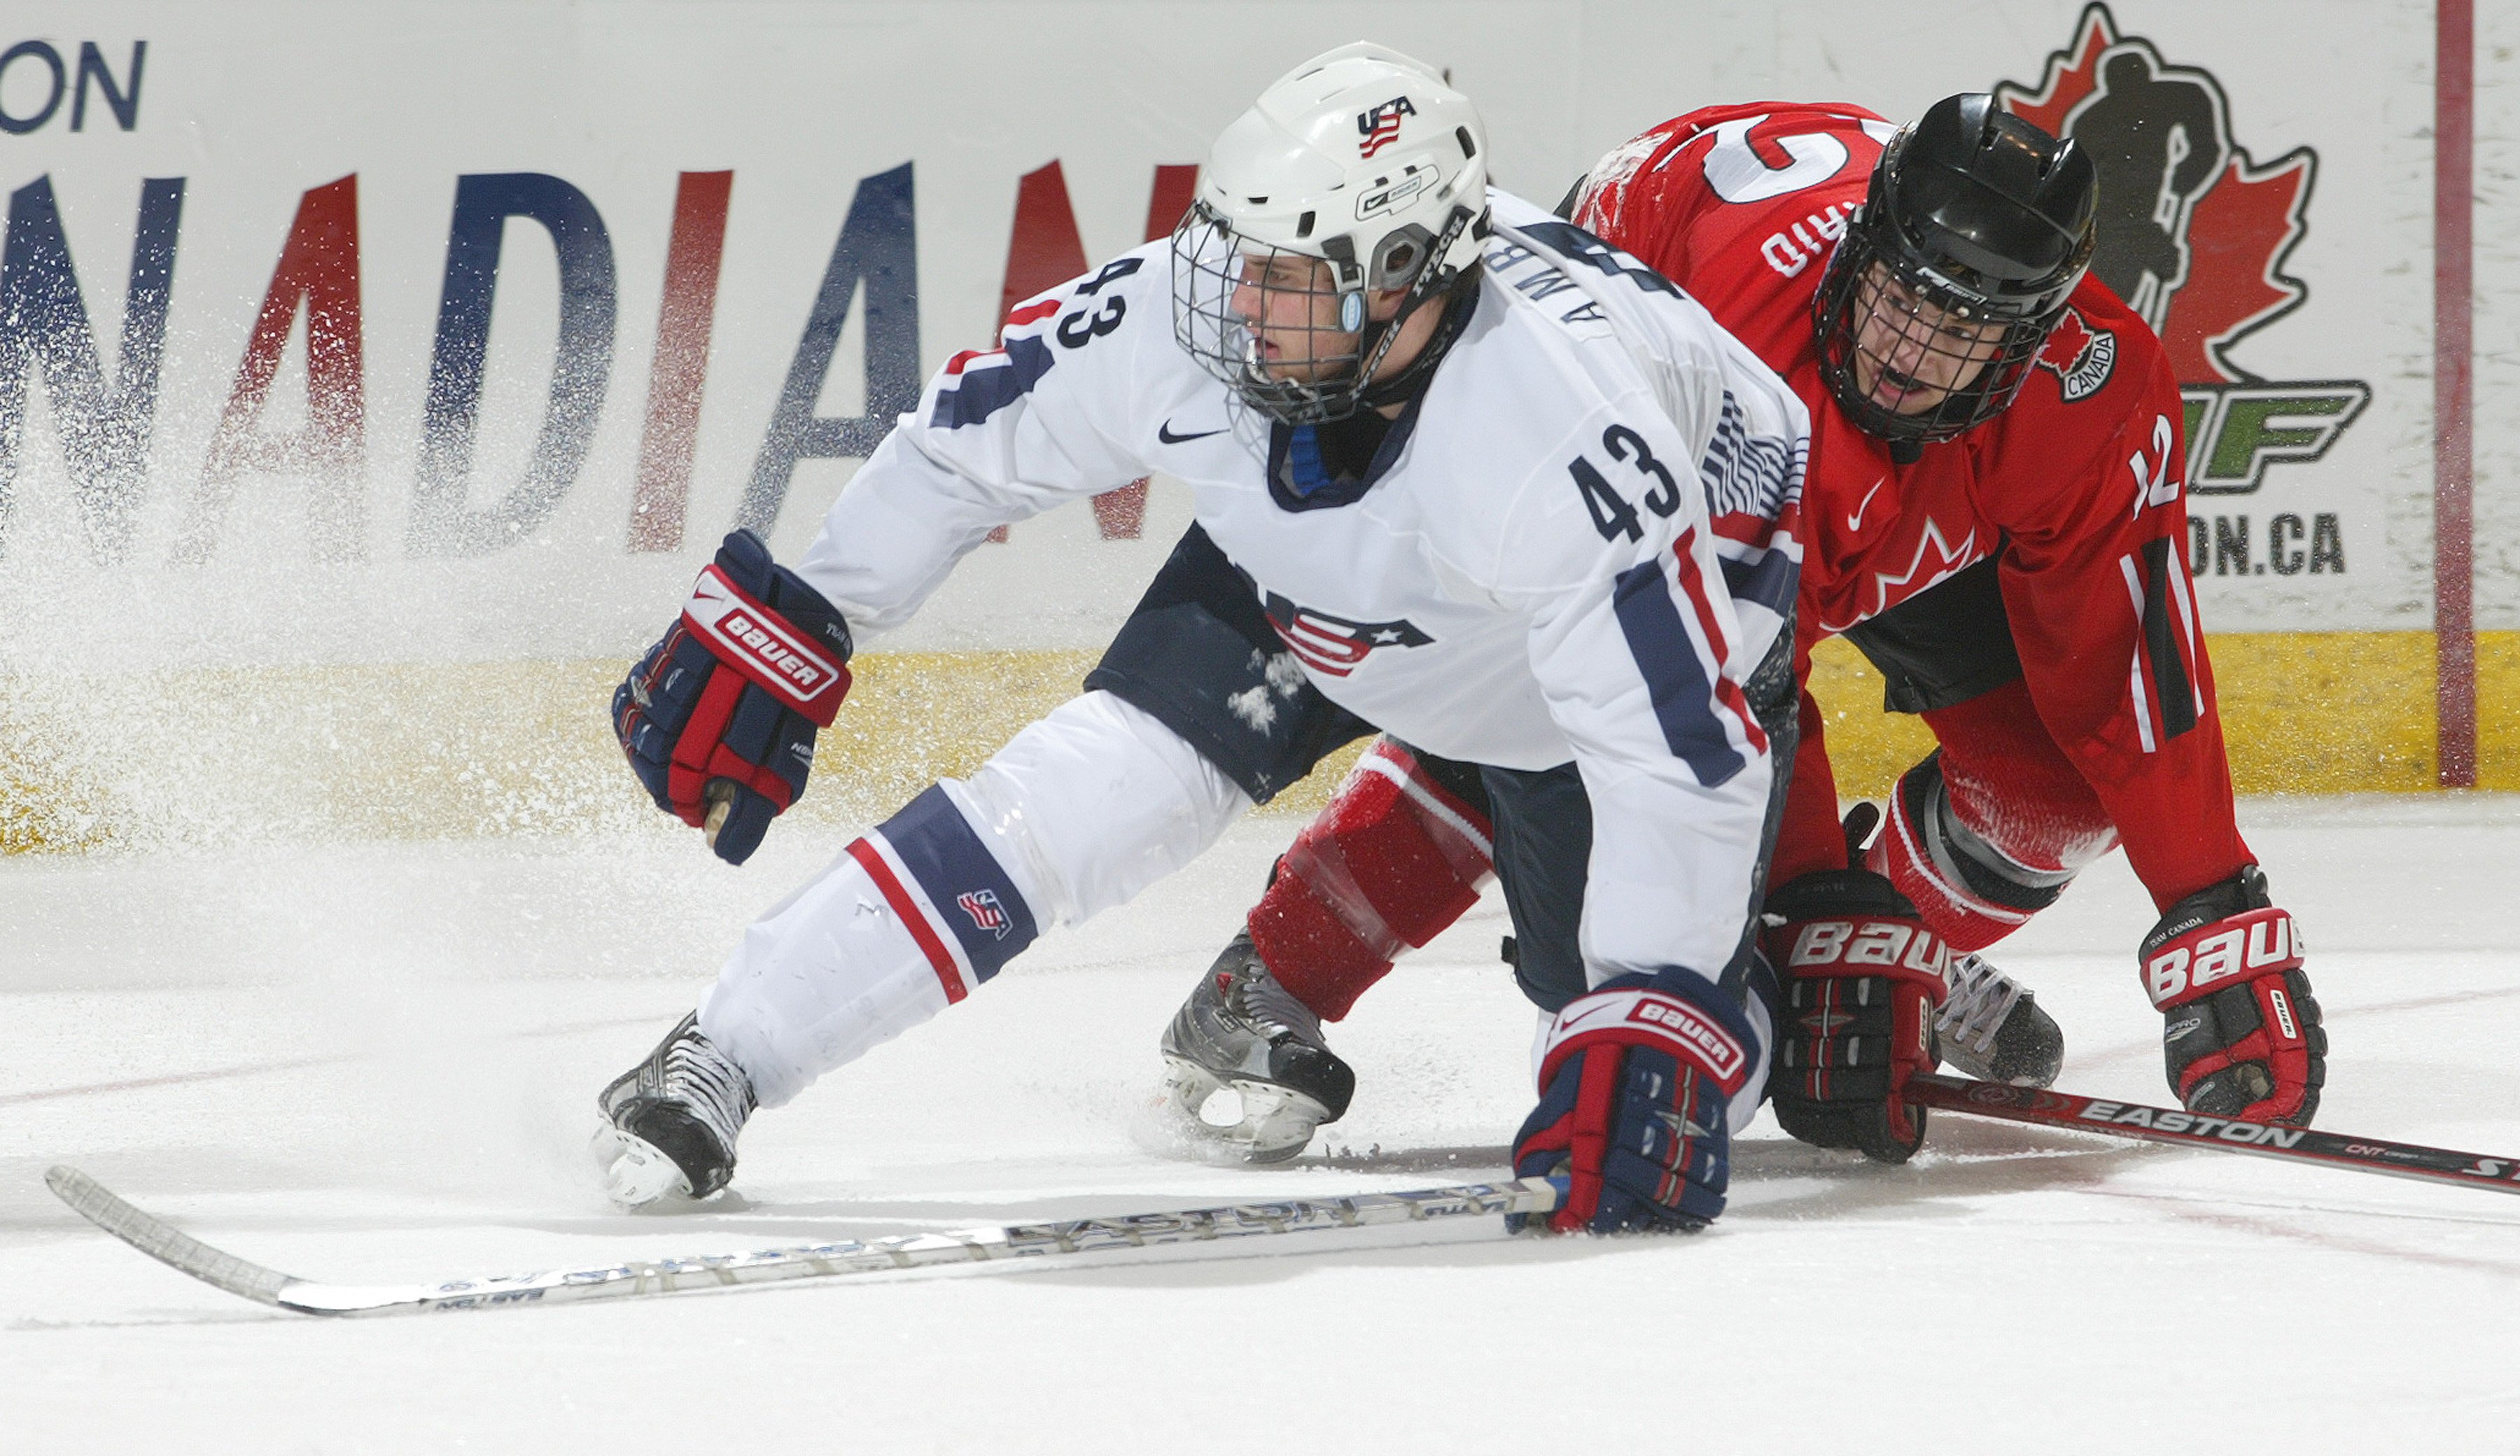 Tyler Amburgey #43 of Team USA collides with Peter Holland #12 of Team Ontario in a game at the John Labatt Centre on January 4, 2008, in London, Ontario | Photo: Claus Andersen/Getty Images